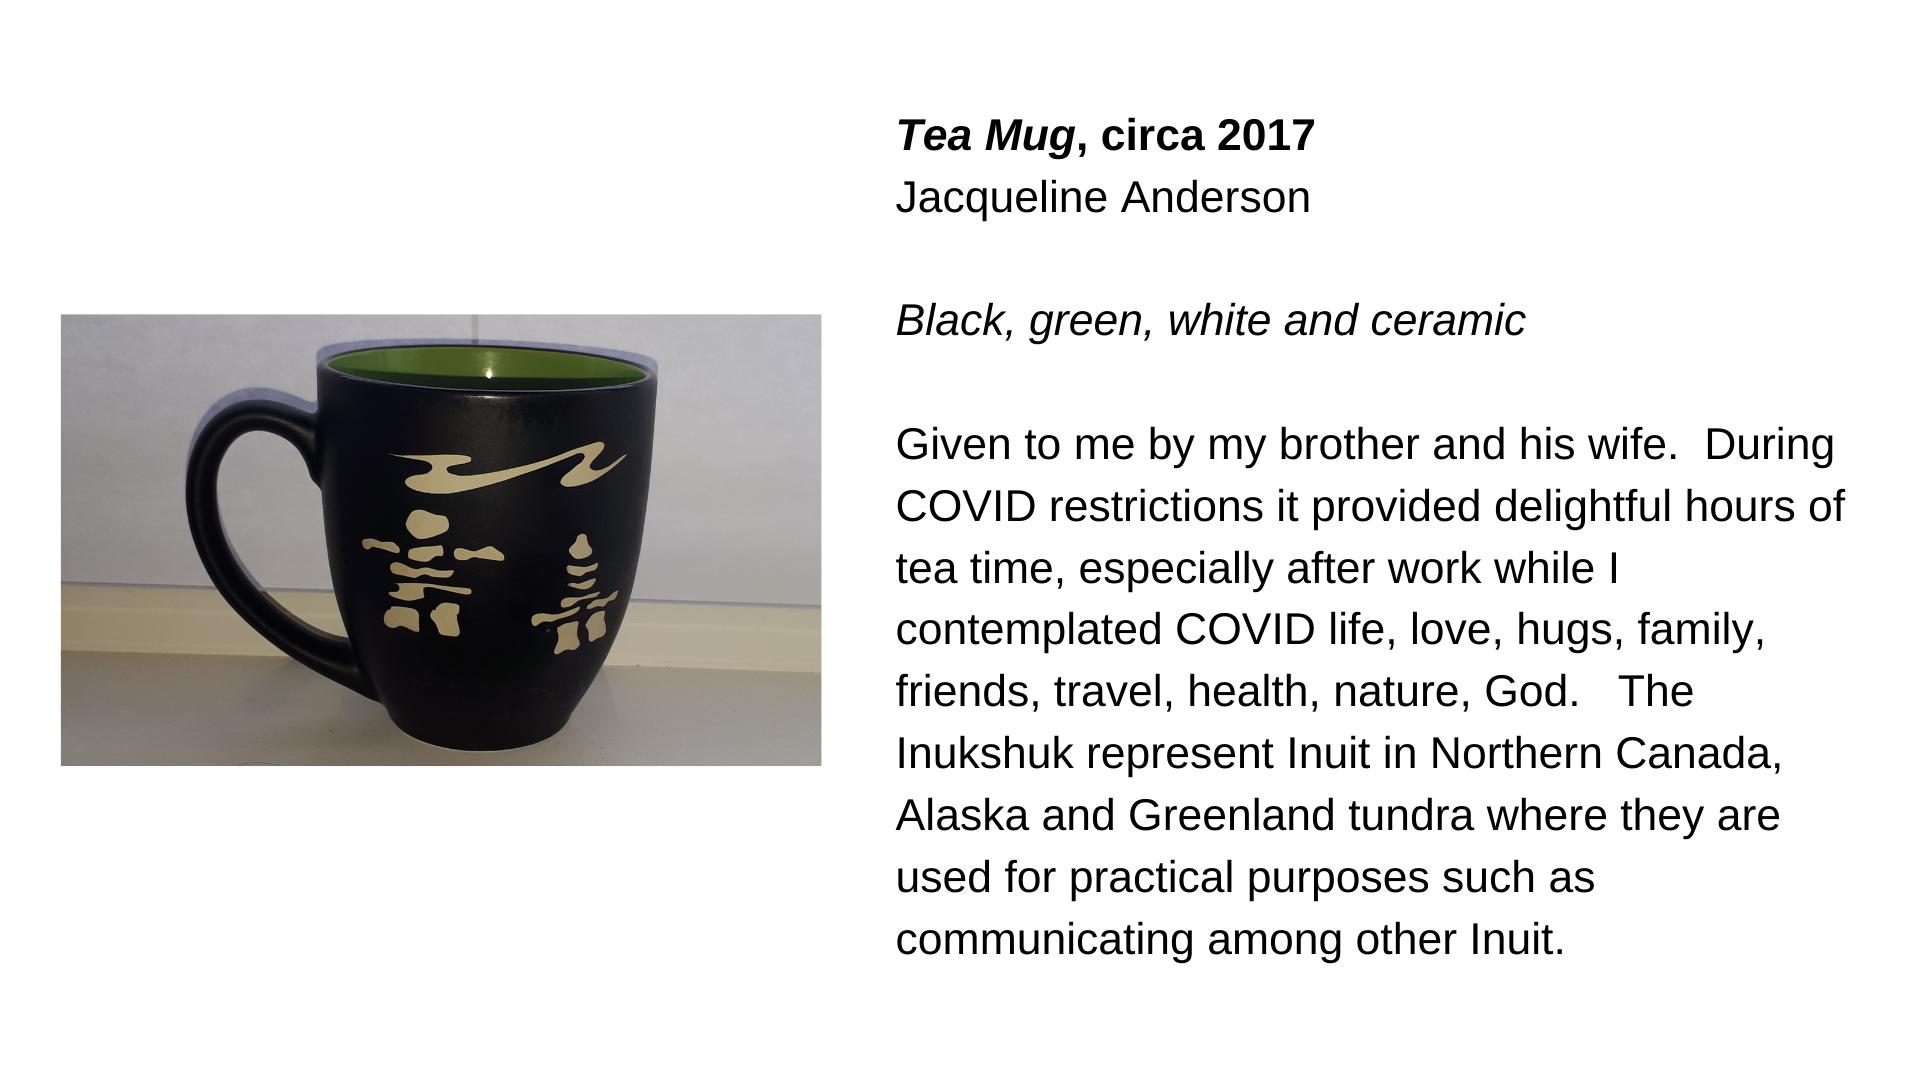  A dark-coloured mug with two inuksuit on it. Next to it is the text, “Tea Mug, circa 2017 - Jacqueline Anderson. Black, green, and white ceramic. Given to me by my brother and his wife.  During COVID restrictions it provided delightful hours of tea 